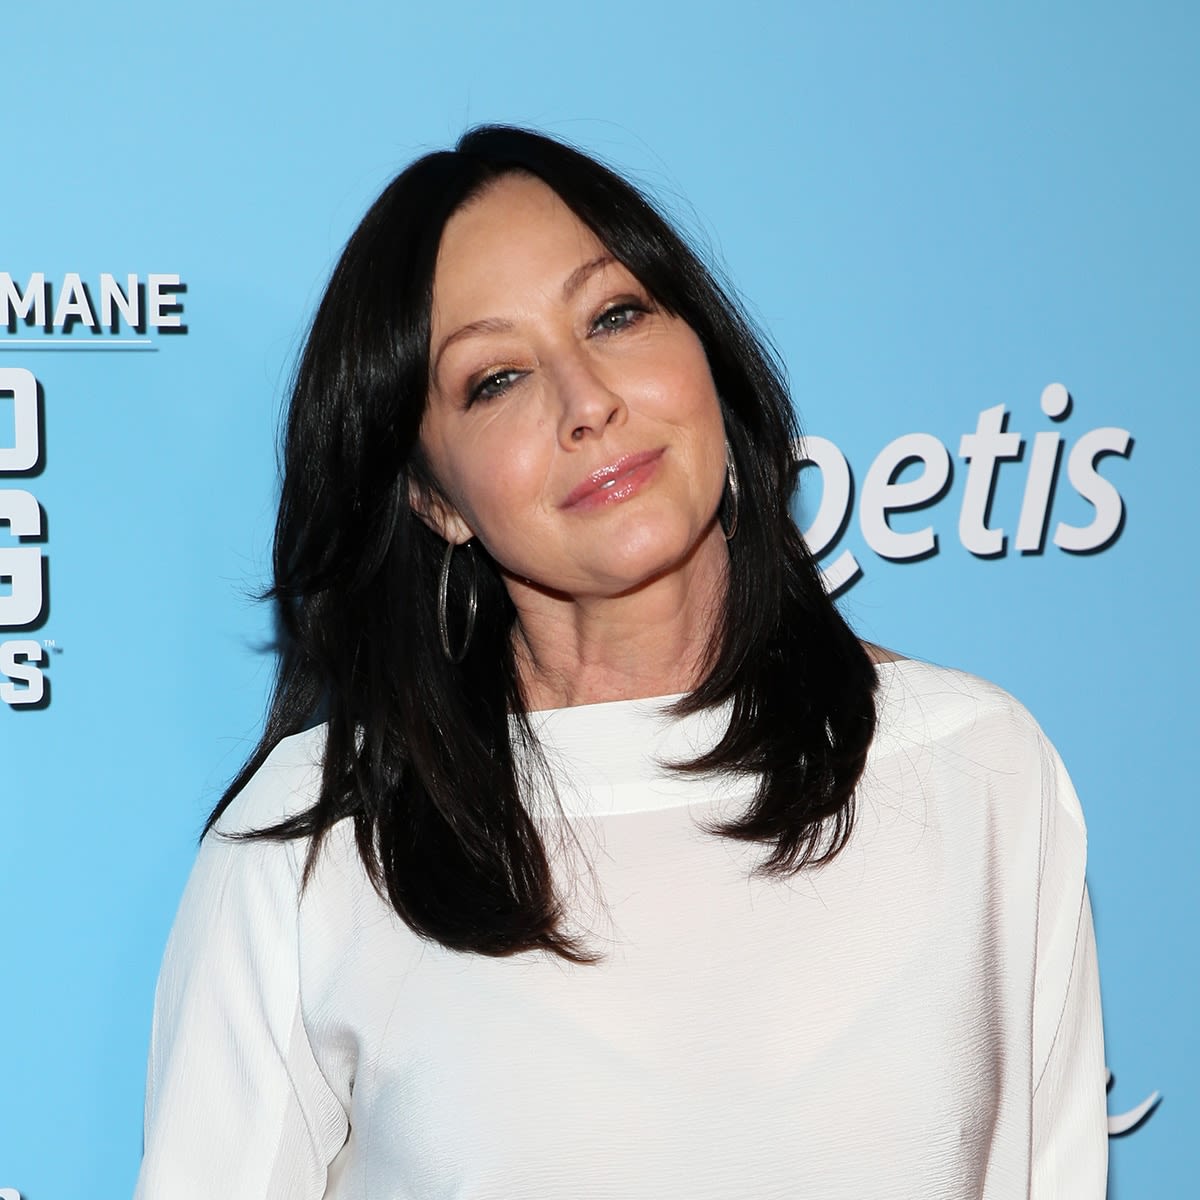 Shannen Doherty Details Fears About Dating Amid Cancer Battle